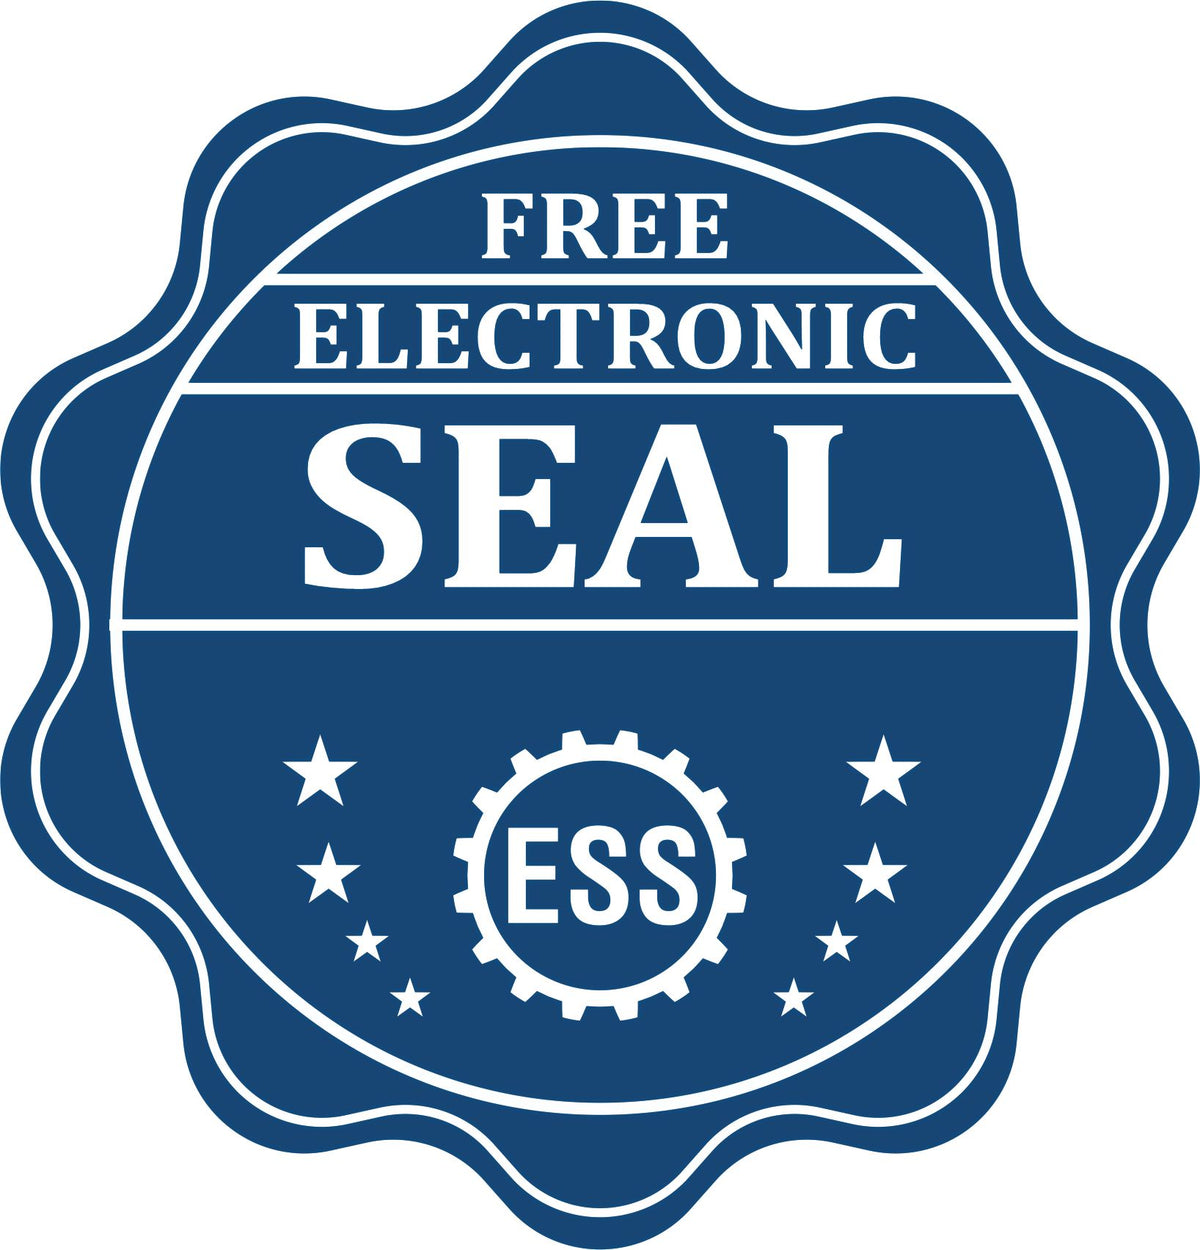 A badge showing a free electronic seal for the Super Slim Wisconsin Notary Public Stamp with stars and the ESS gear on the emblem.